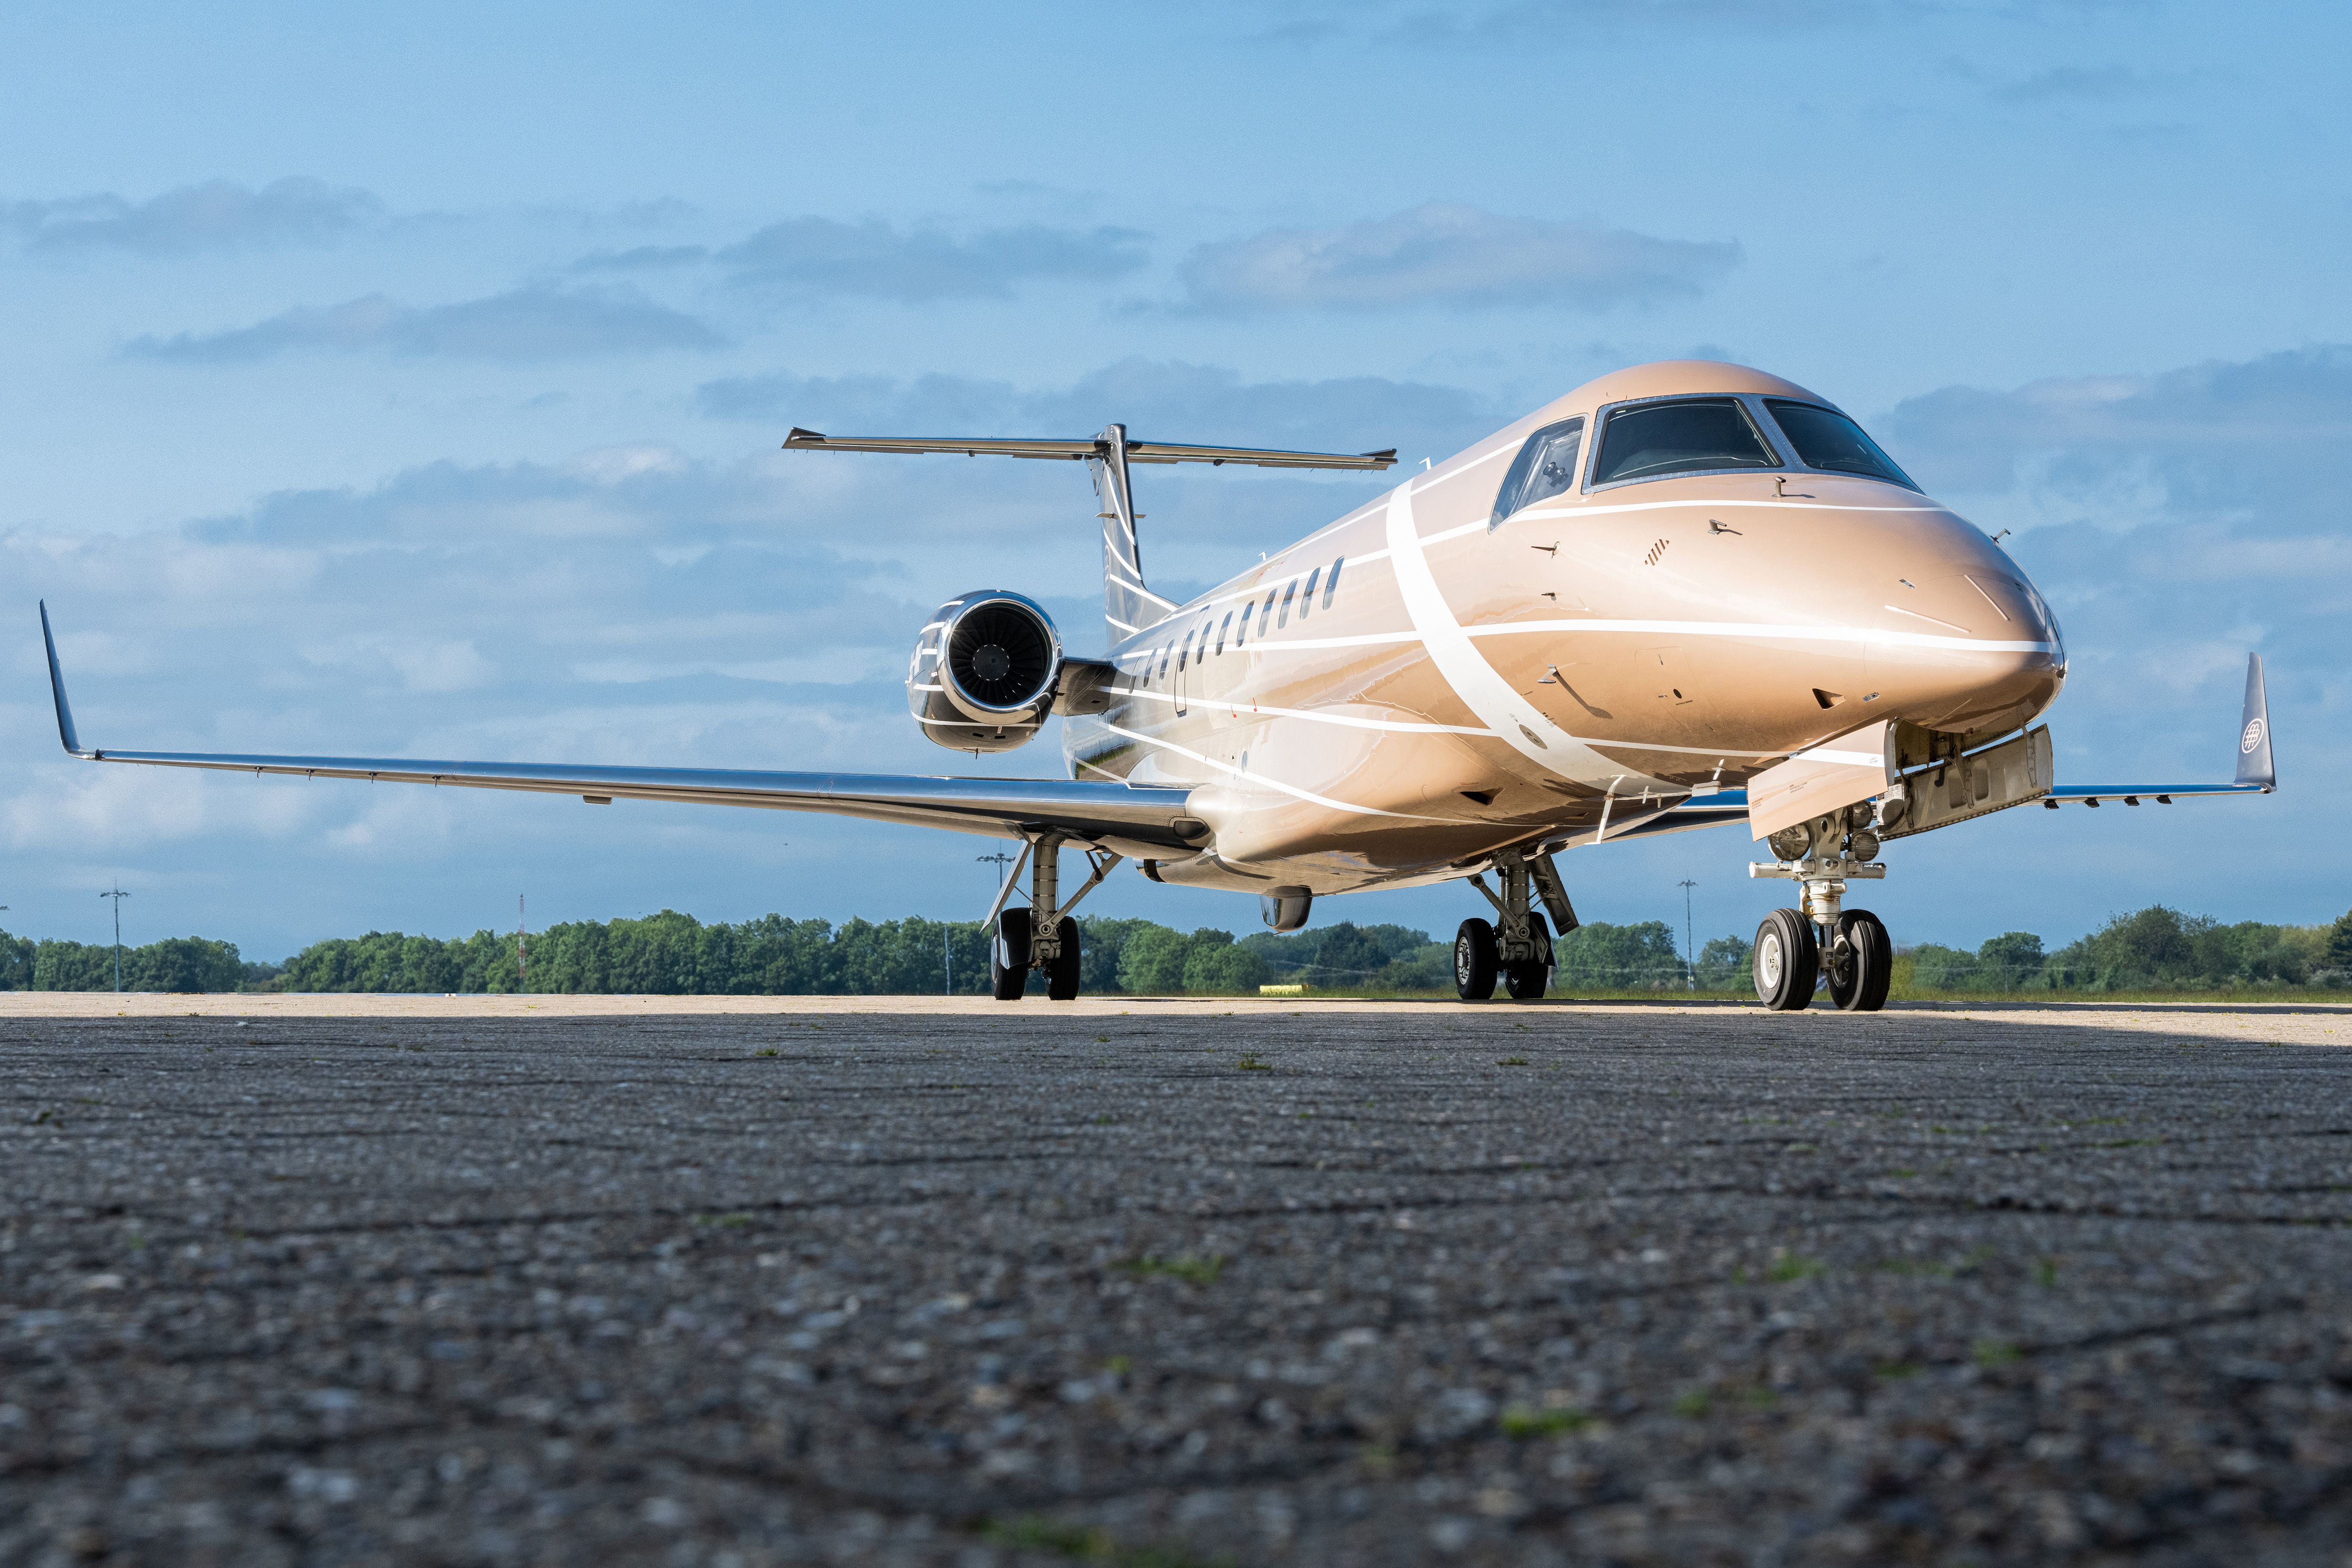 AirX's Embraer Legacy 600 taxiing at an airfield.